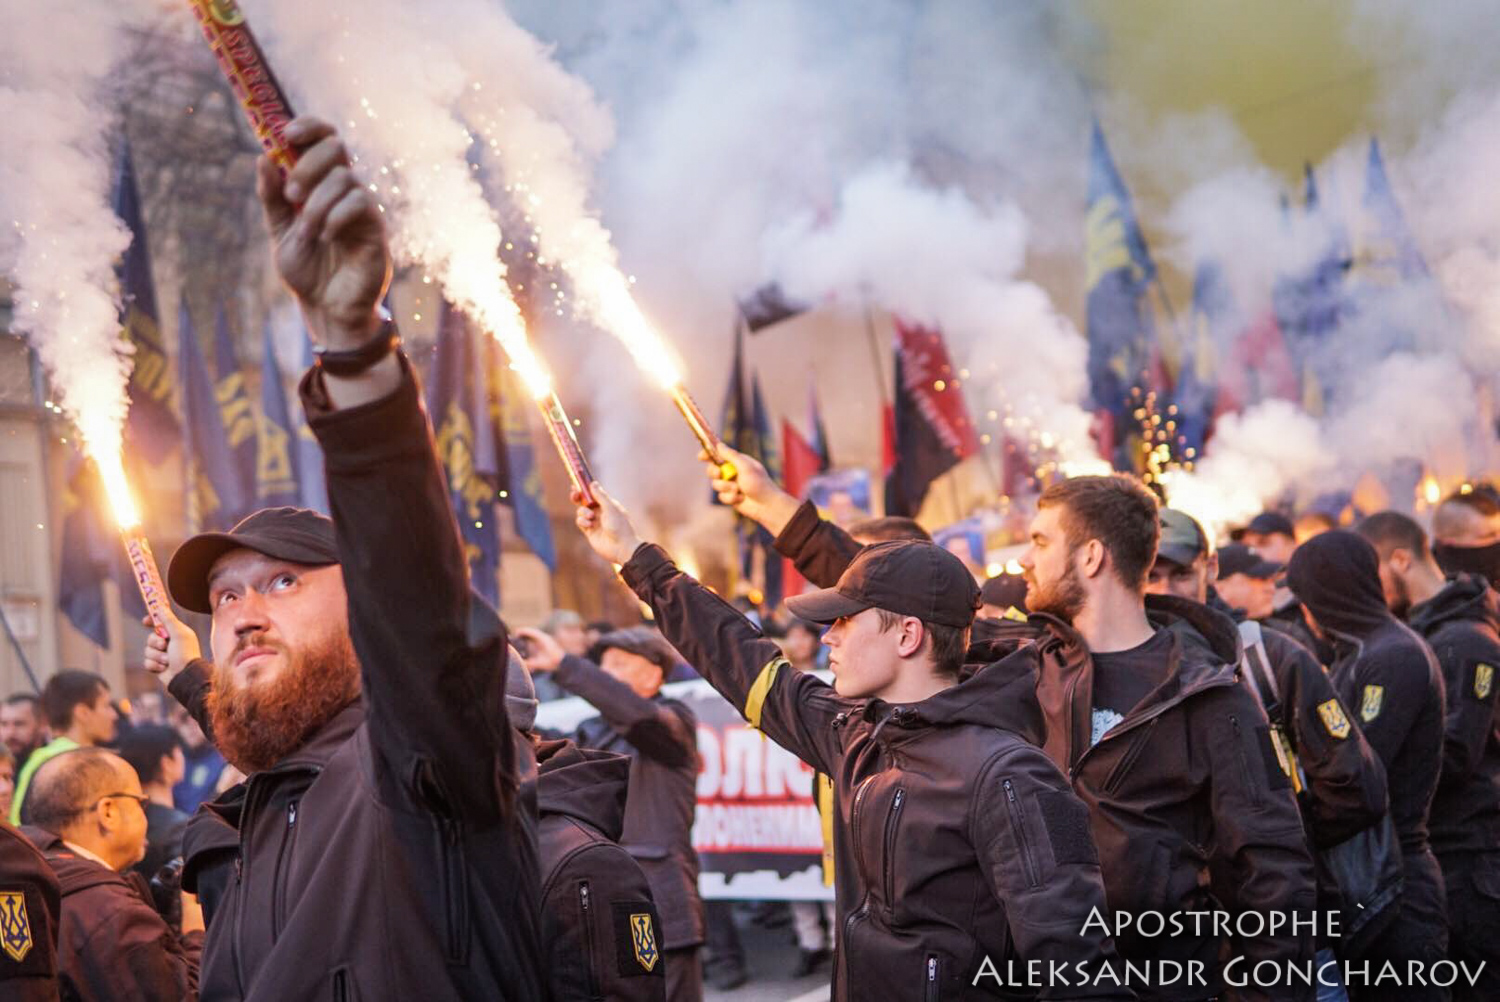 German Neo Nazis March With Ukrainian Nationalists In Upa March